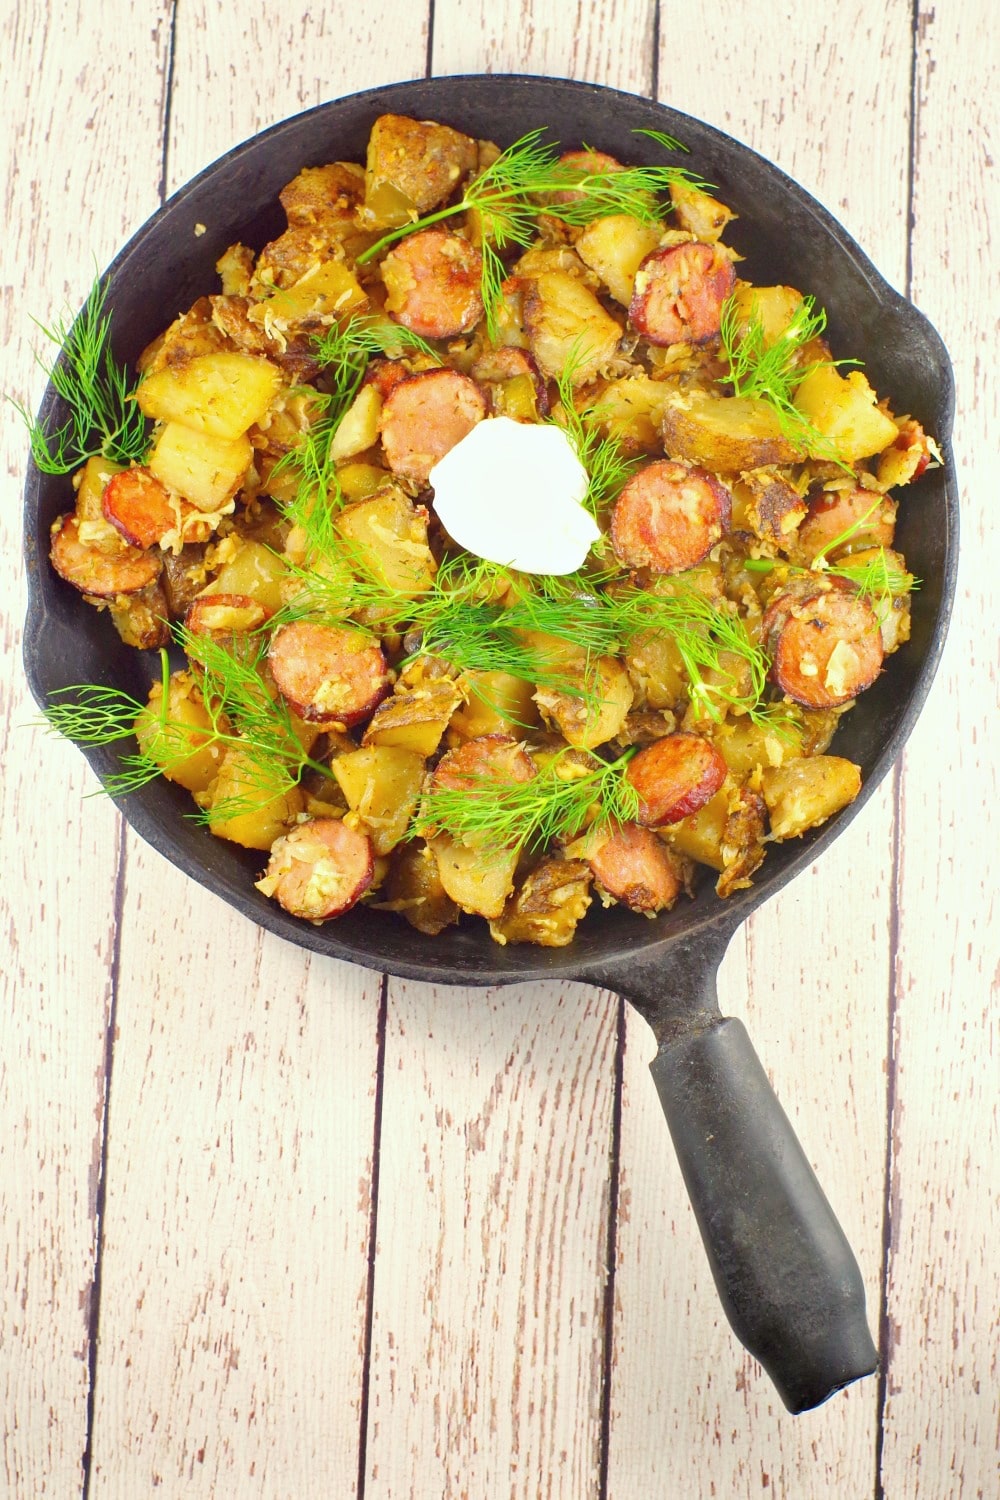 This easy Ukrainian recipe uses home made hash browns that can be made with fresh or leftover baked potatoes, dill, Ukrainian sausage, dry cottage cheese and sauerkraut for an easy and quick breakfast that's the perfect brunch potluck idea.